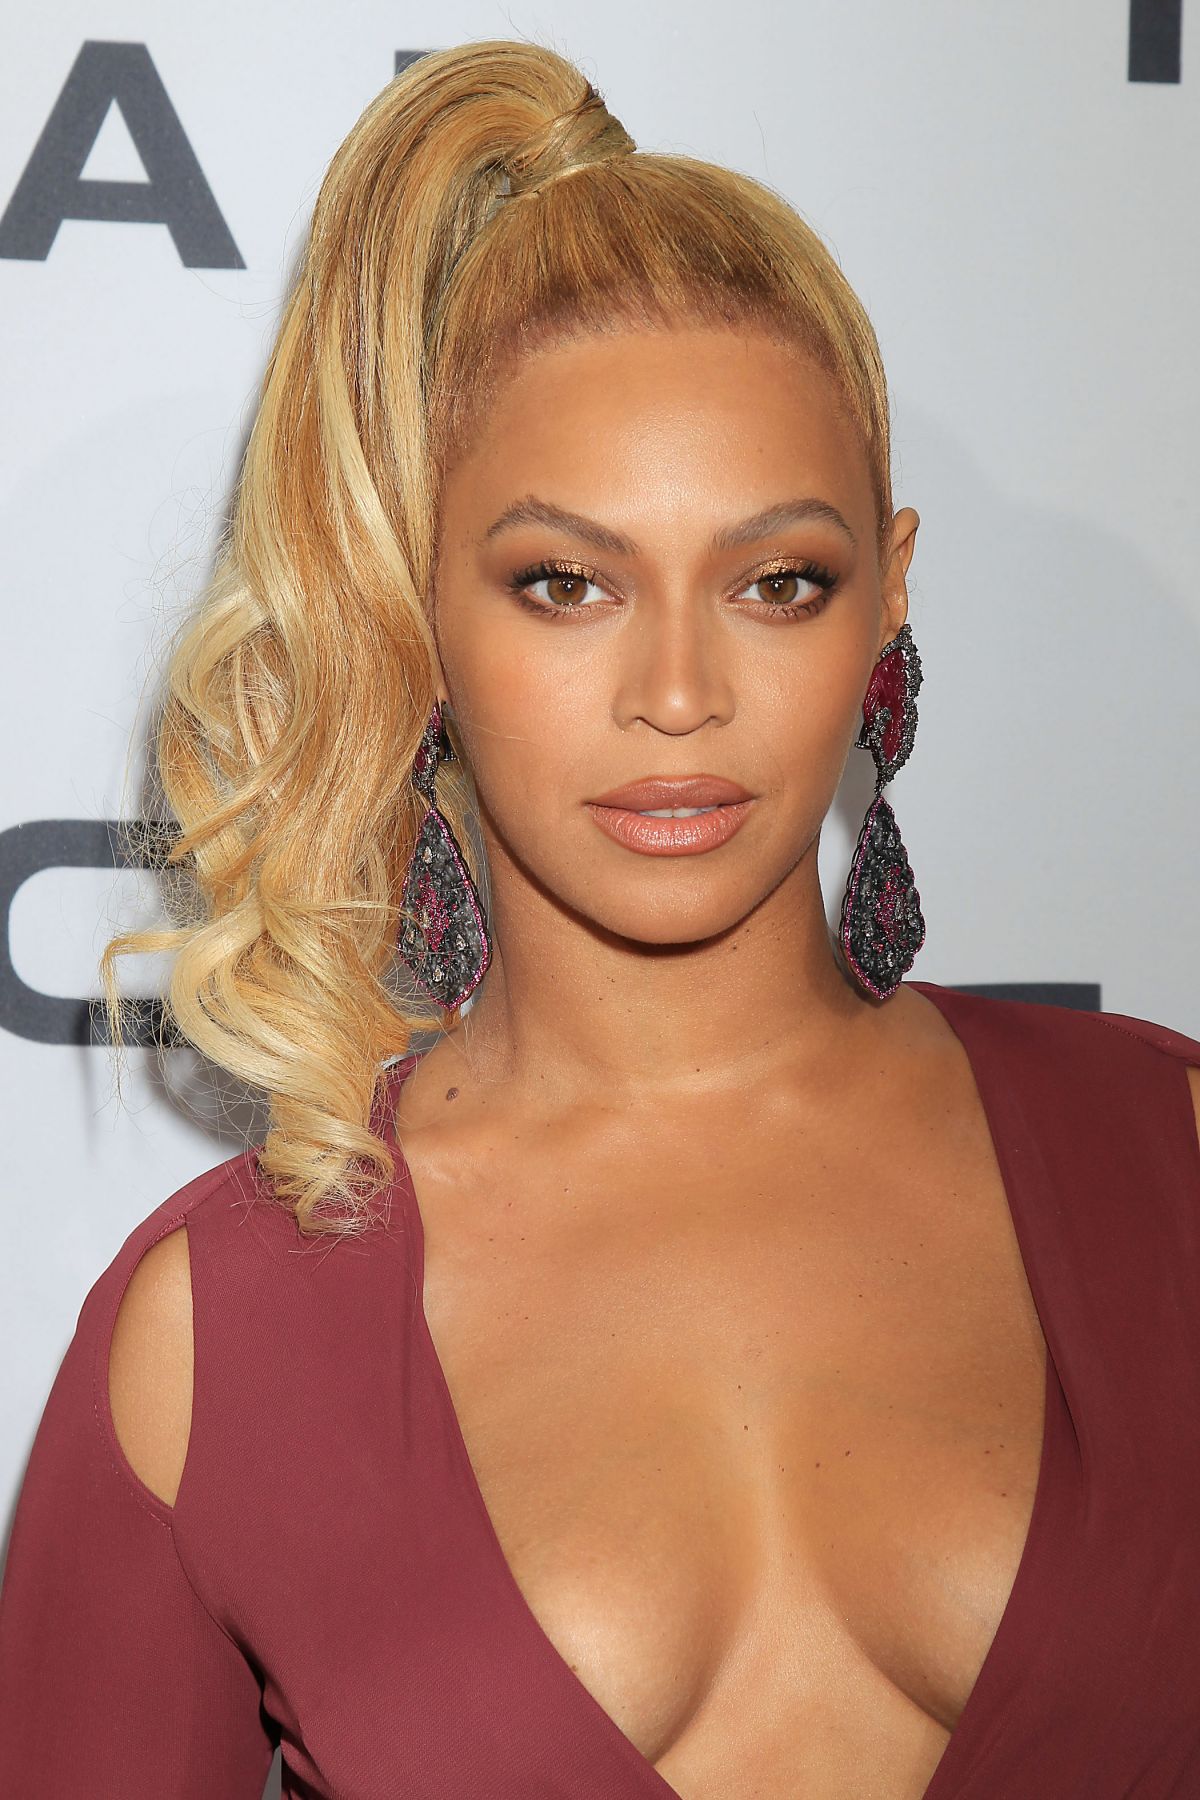 beyonce-at-tidal-x-1020-amplified-by-htc-in-brooklyn-10-20-2015_21.jpg